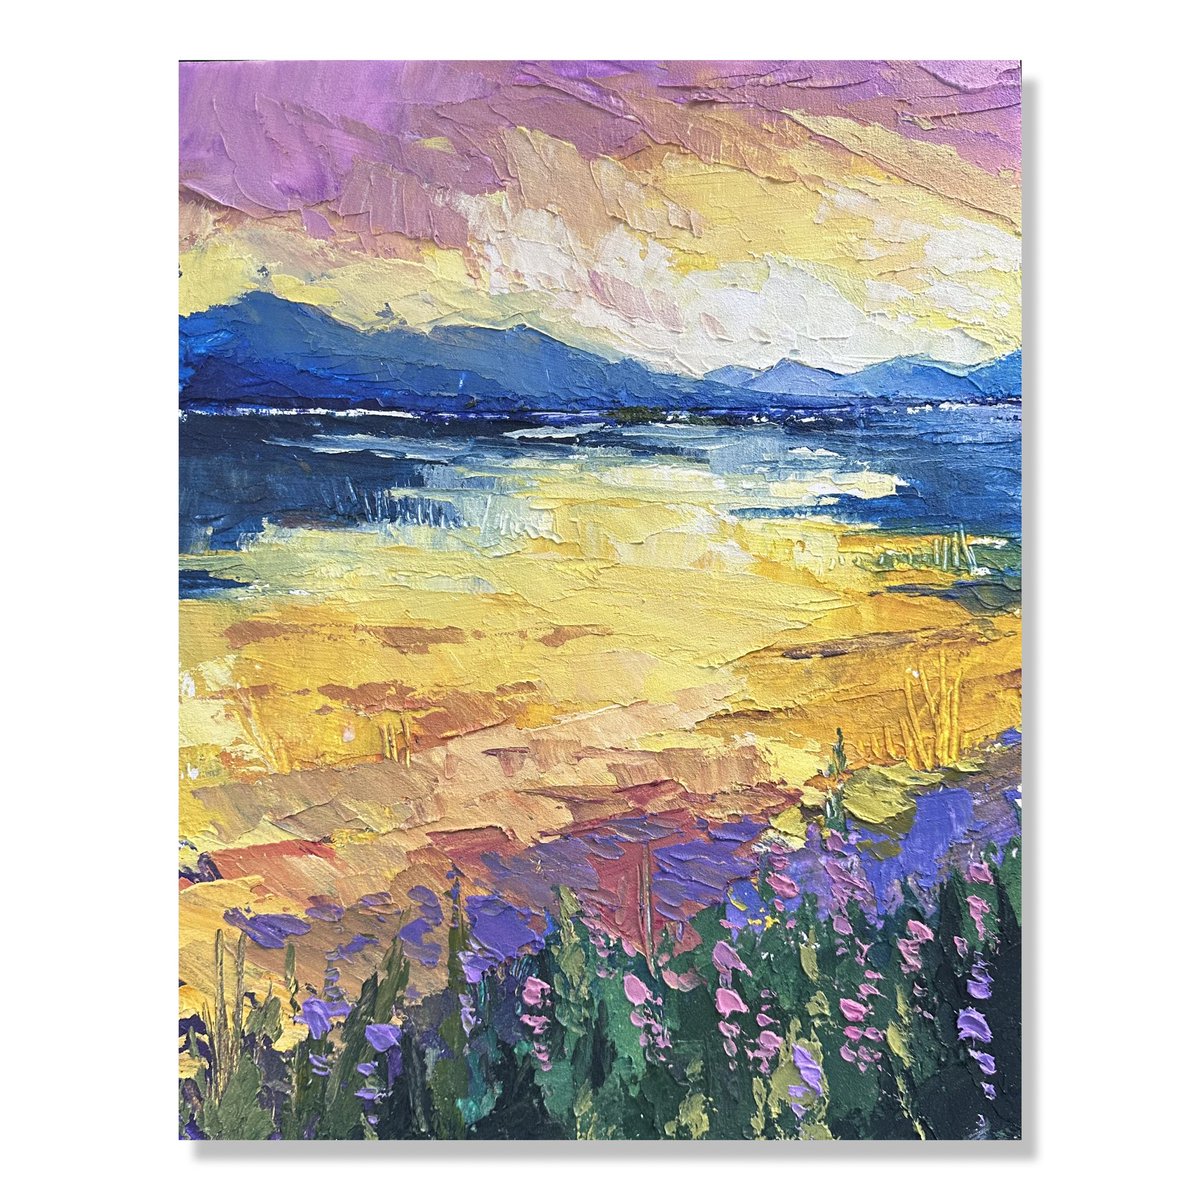 Just finished up this gorgeous 16” x 20” painting titled “Lupine Bloom” - the perfect ode to spring! Visit samanthawilliamschapelsky.shop/products/lupin… for details and all artworks ship for free until May 5, 2024! #yyc #yycart #calgaryart #calgaryartist #yegart #edmontonartist #springart